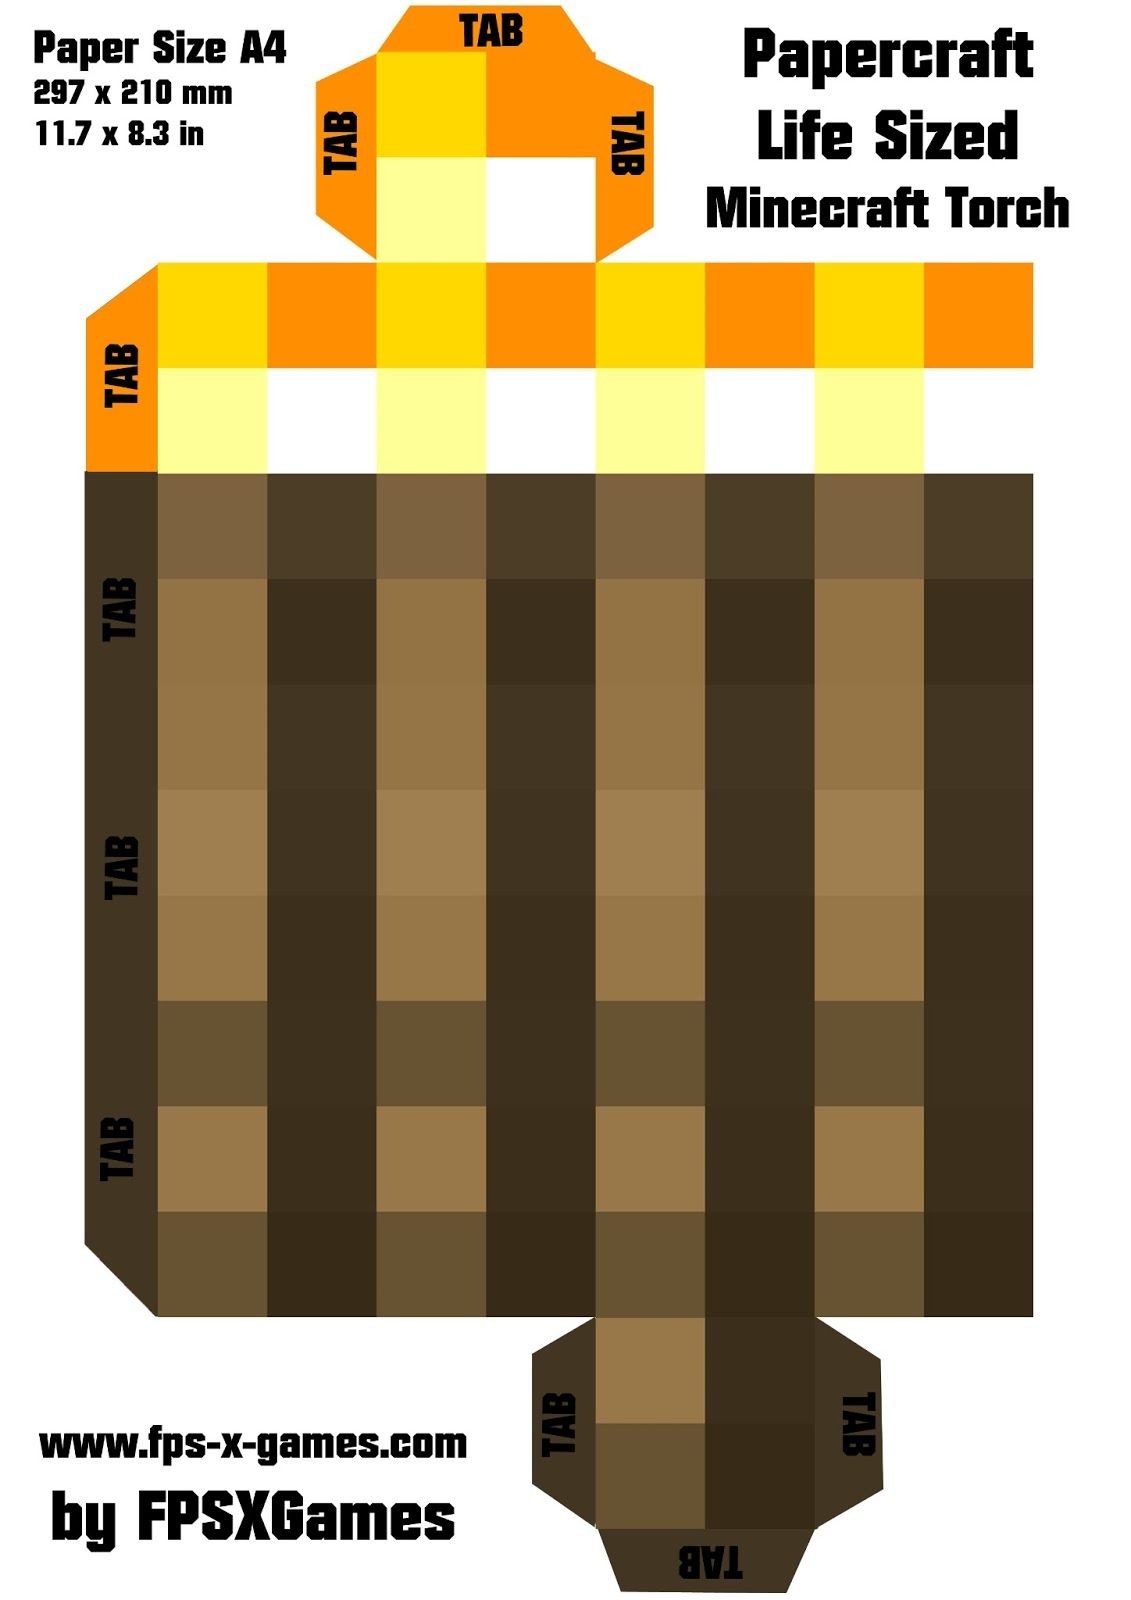 Minecraft-opening chest, cubee, printables  Manualidades de minecraft,  Herramientas de minecraft, Minecraft para armar